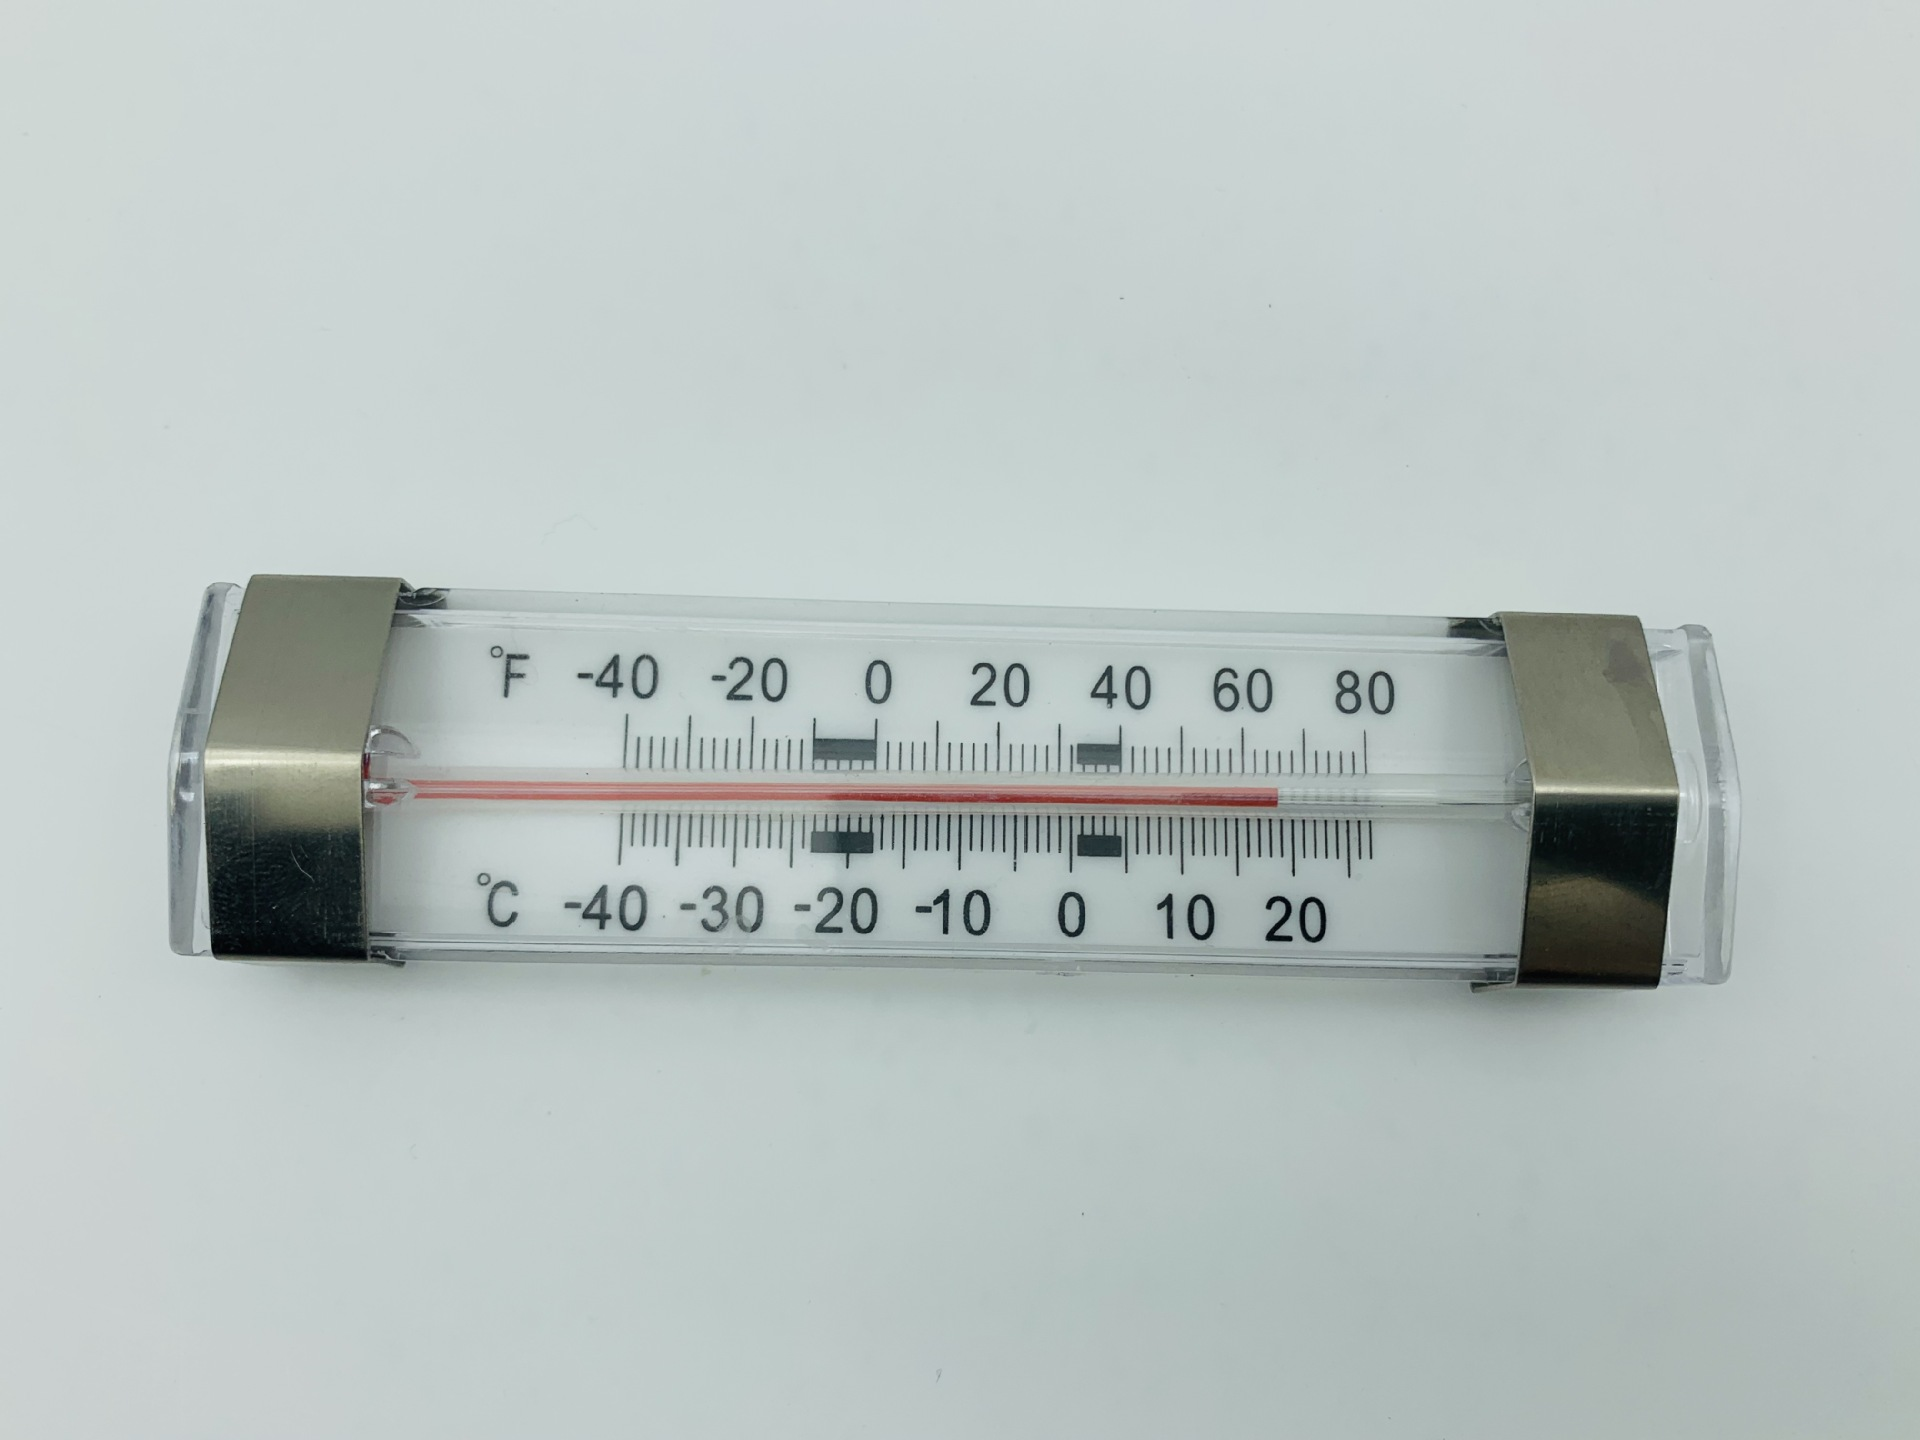 LBT-12 Glass Tube Refrigerator thermometers